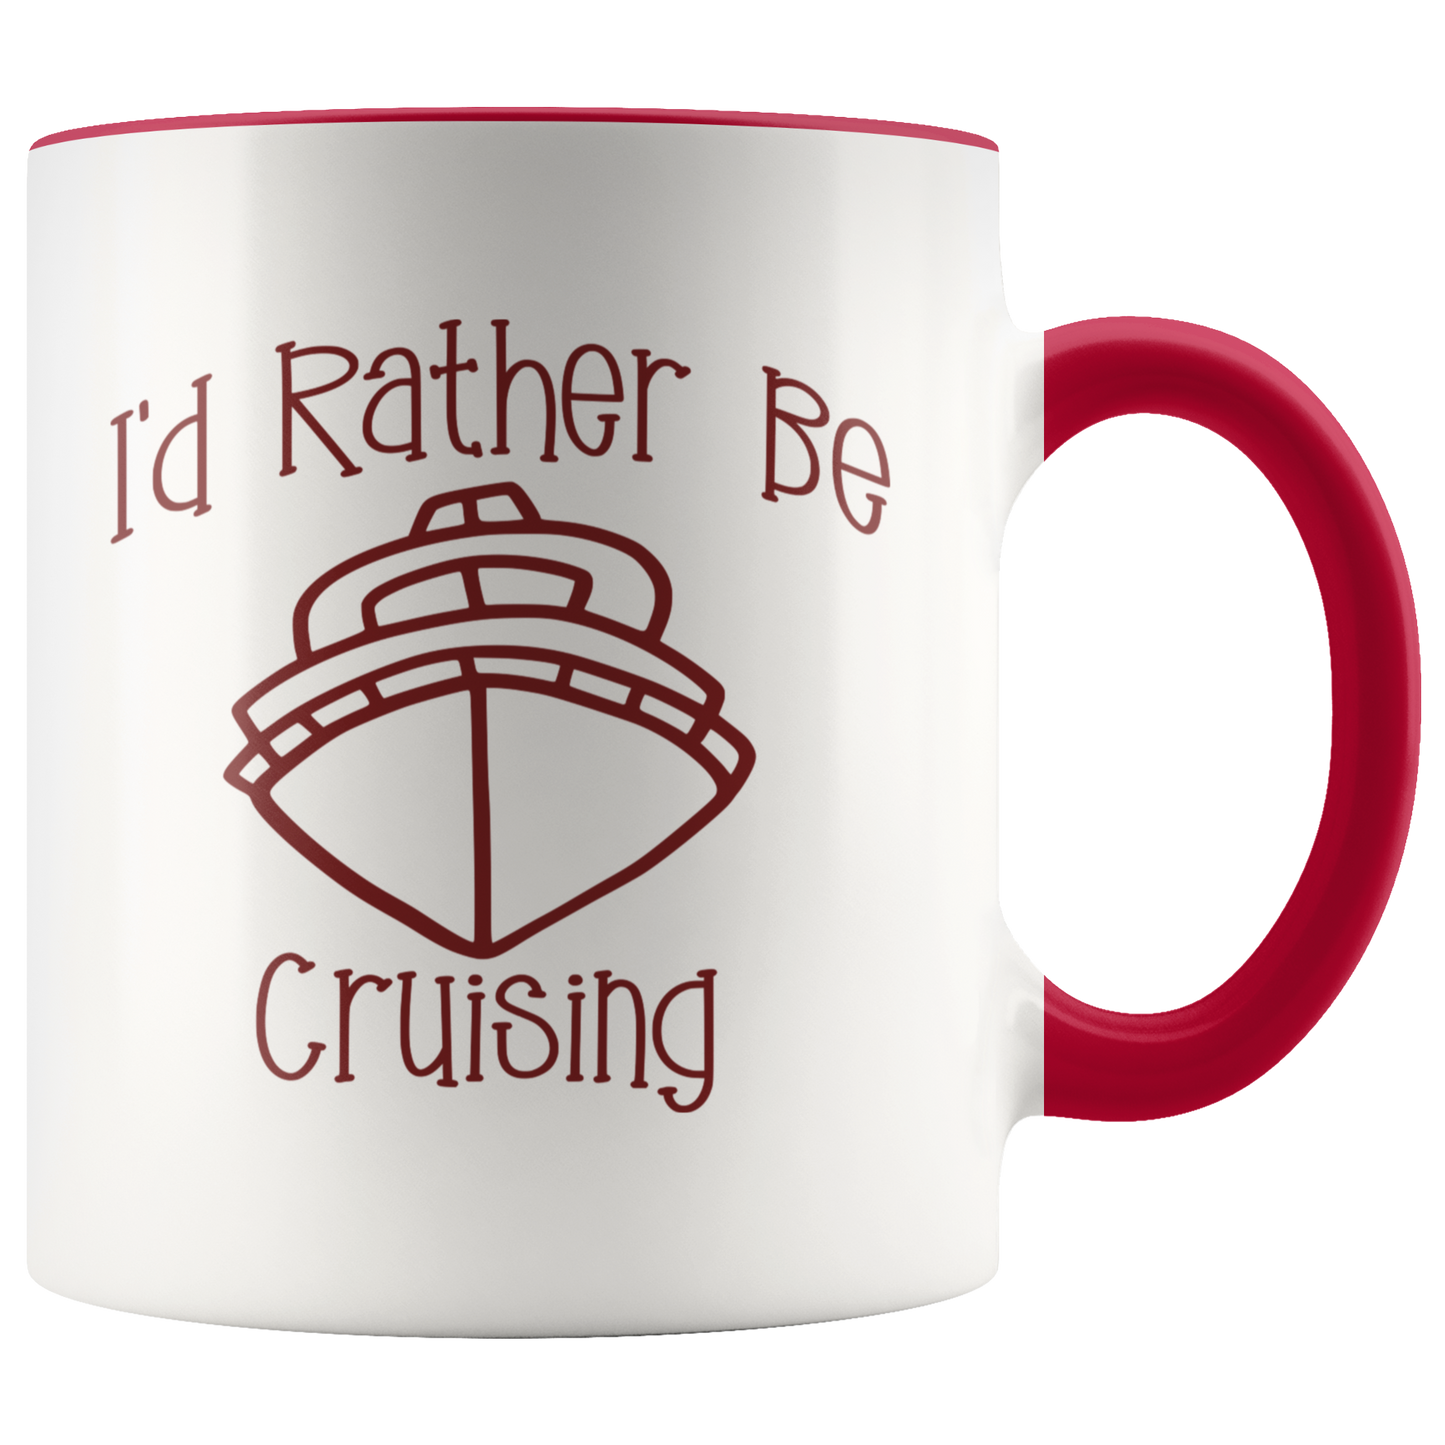 Cruising gift for friends and family ceramic funny coffee mug for cruisers travelers gift